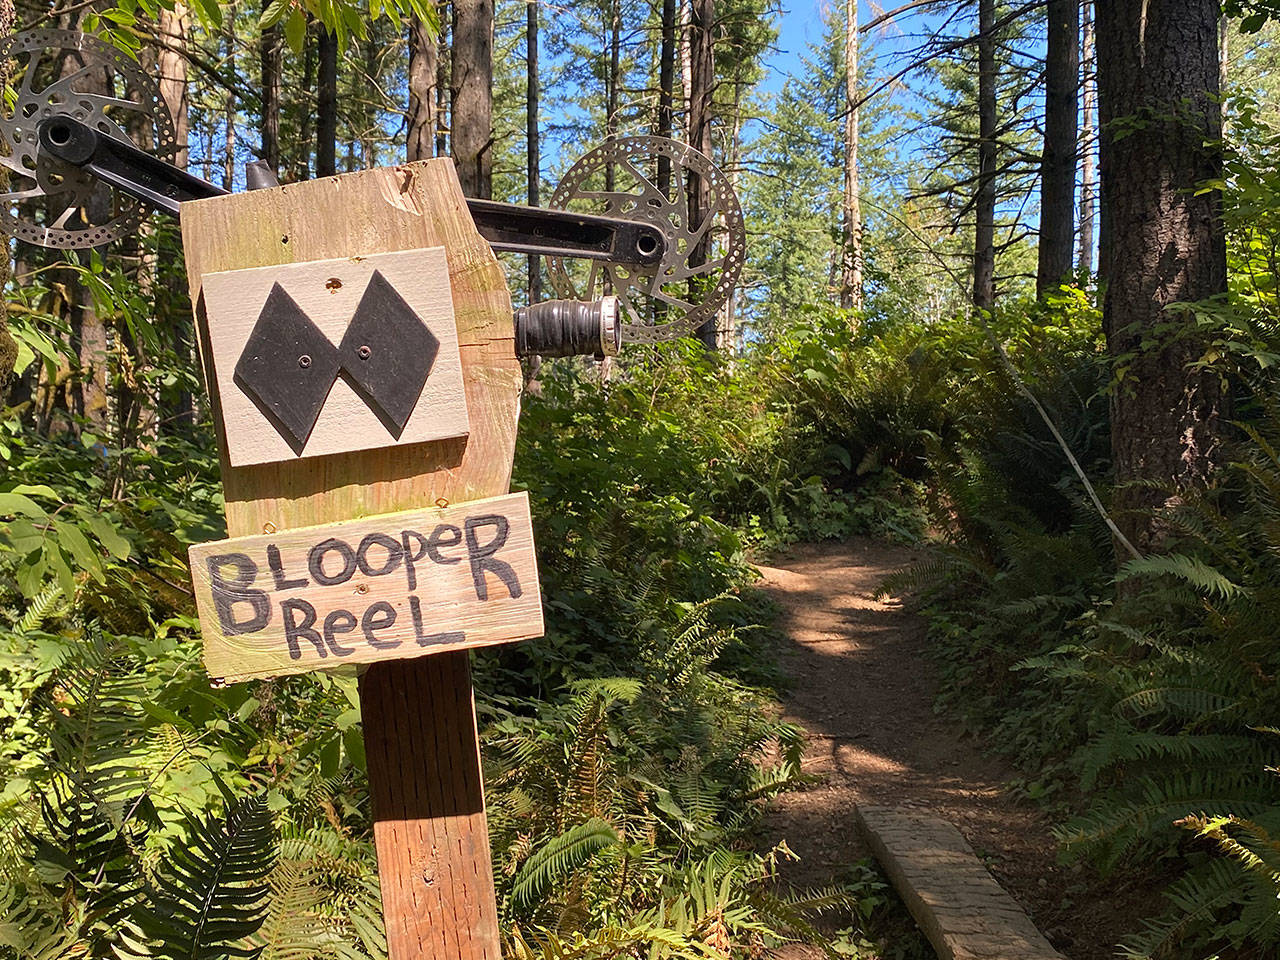 Signs along the “east side” of the Black Diamond Open Space indicate its favored status among mountain bikers. On the “west side” the ladder bridge spans a peaceful stretch of Ravensdale Creek. Photo by Kevin Hanson